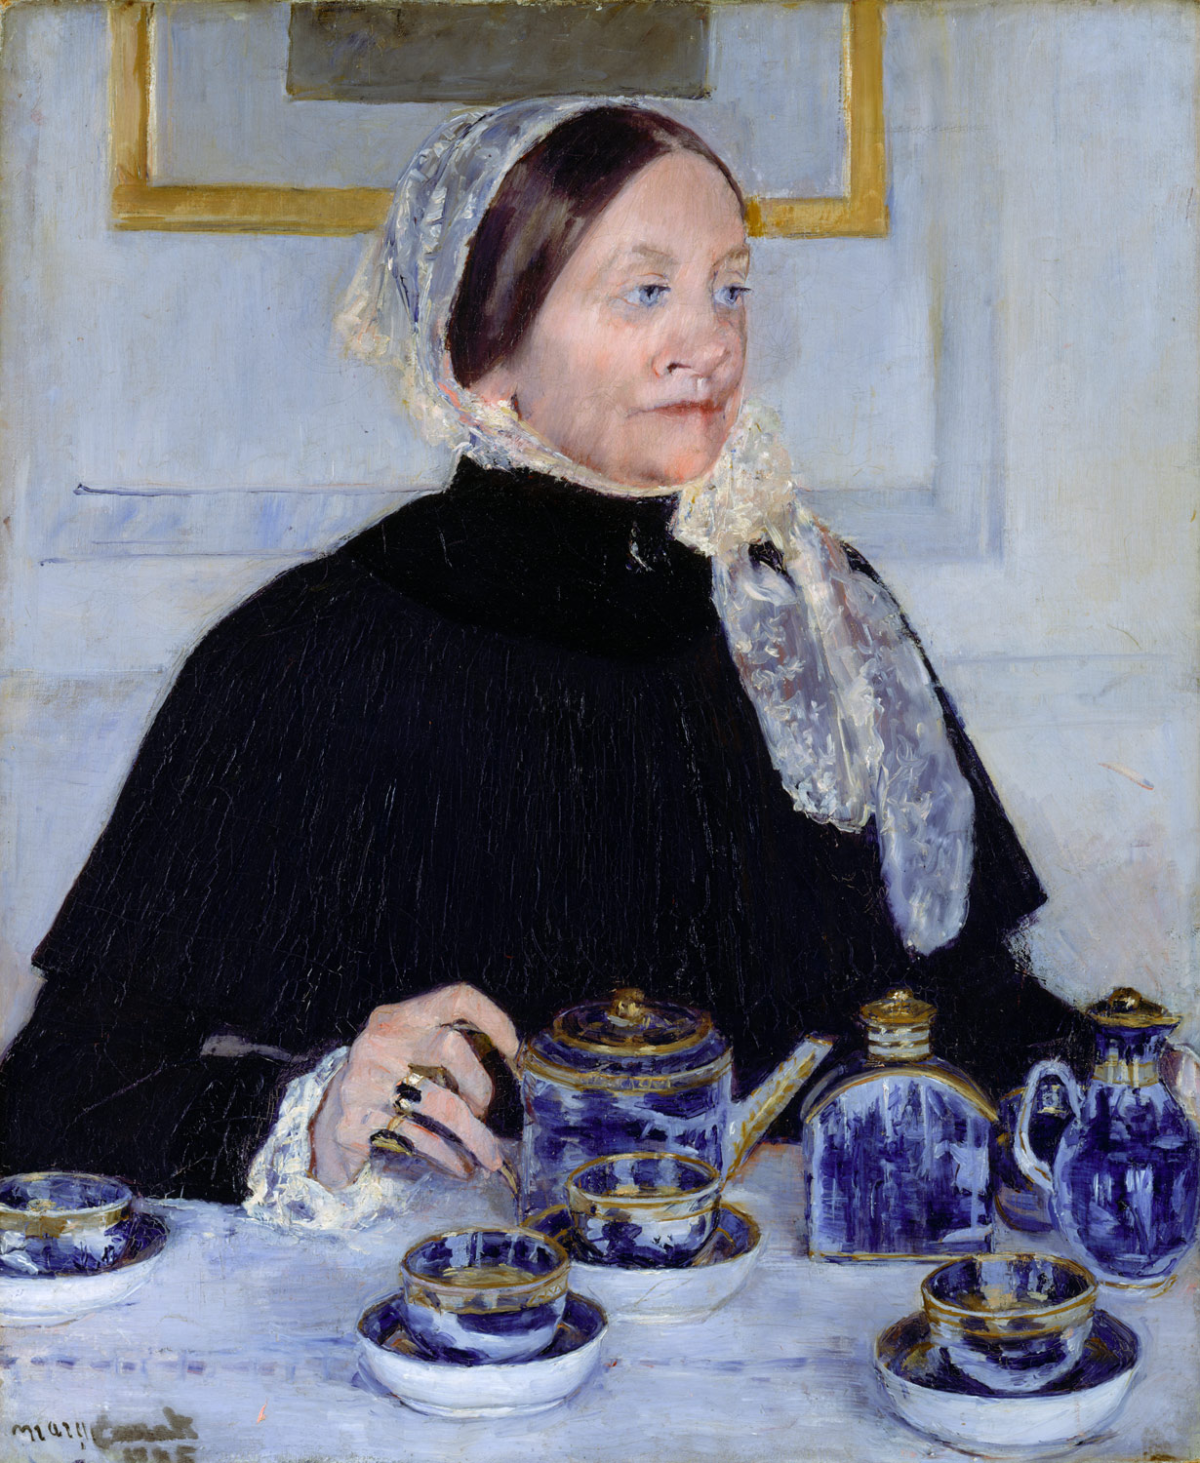 Painting by Cassatt, Lady at the Tea Table